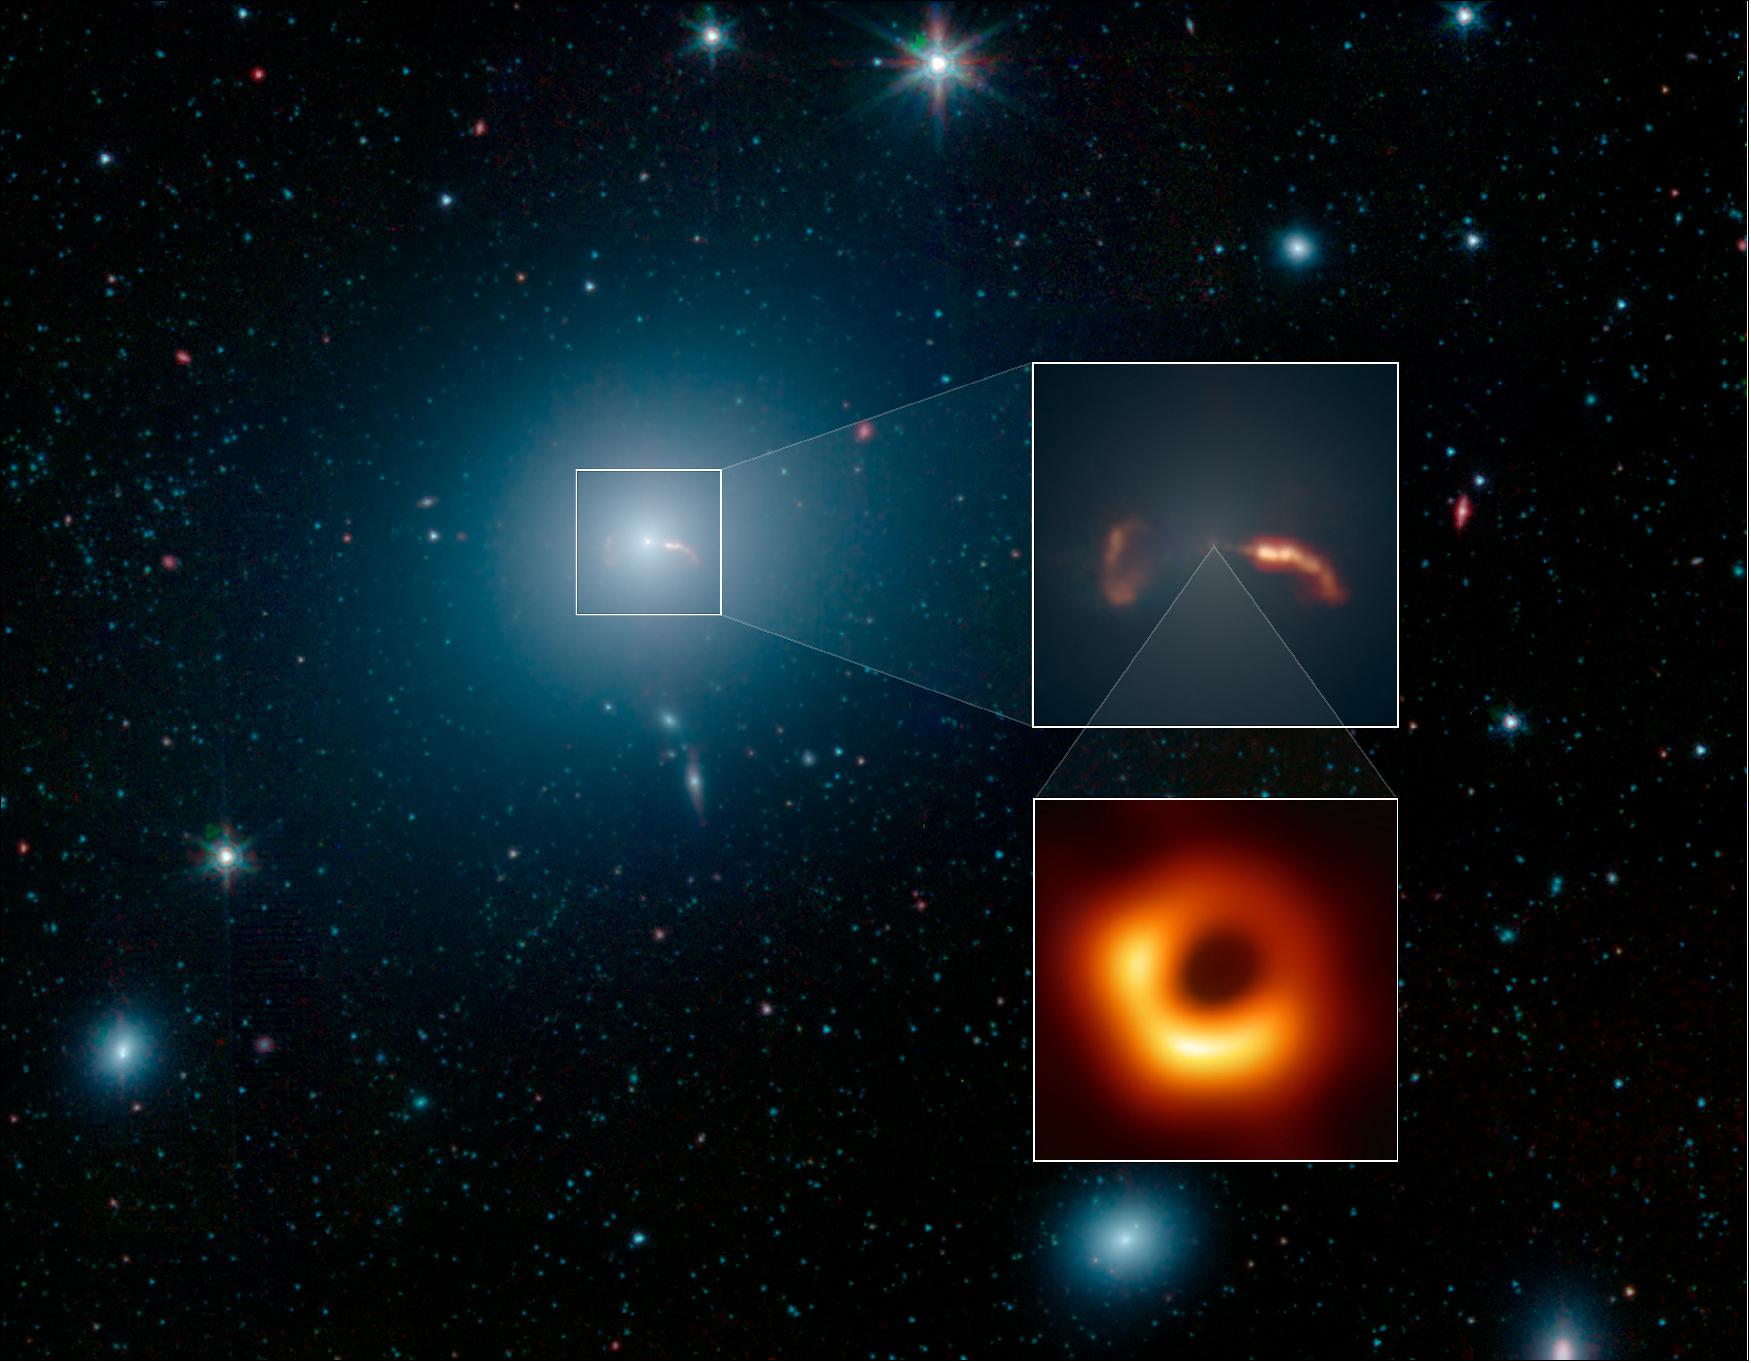 Figure 11: This wide-field image of the galaxy M87 was taken by NASA's Spitzer Space Telescope. The top inset shows a close-up of two shockwaves, created by a jet emanating from the galaxy's supermassive black hole. The Event Horizon Telescope recently took a close-up image of the silhouette of that black hole, show in the second inset (image credit: NASA/JPL-Caltech/Event Horizon Telescope Collaboration)